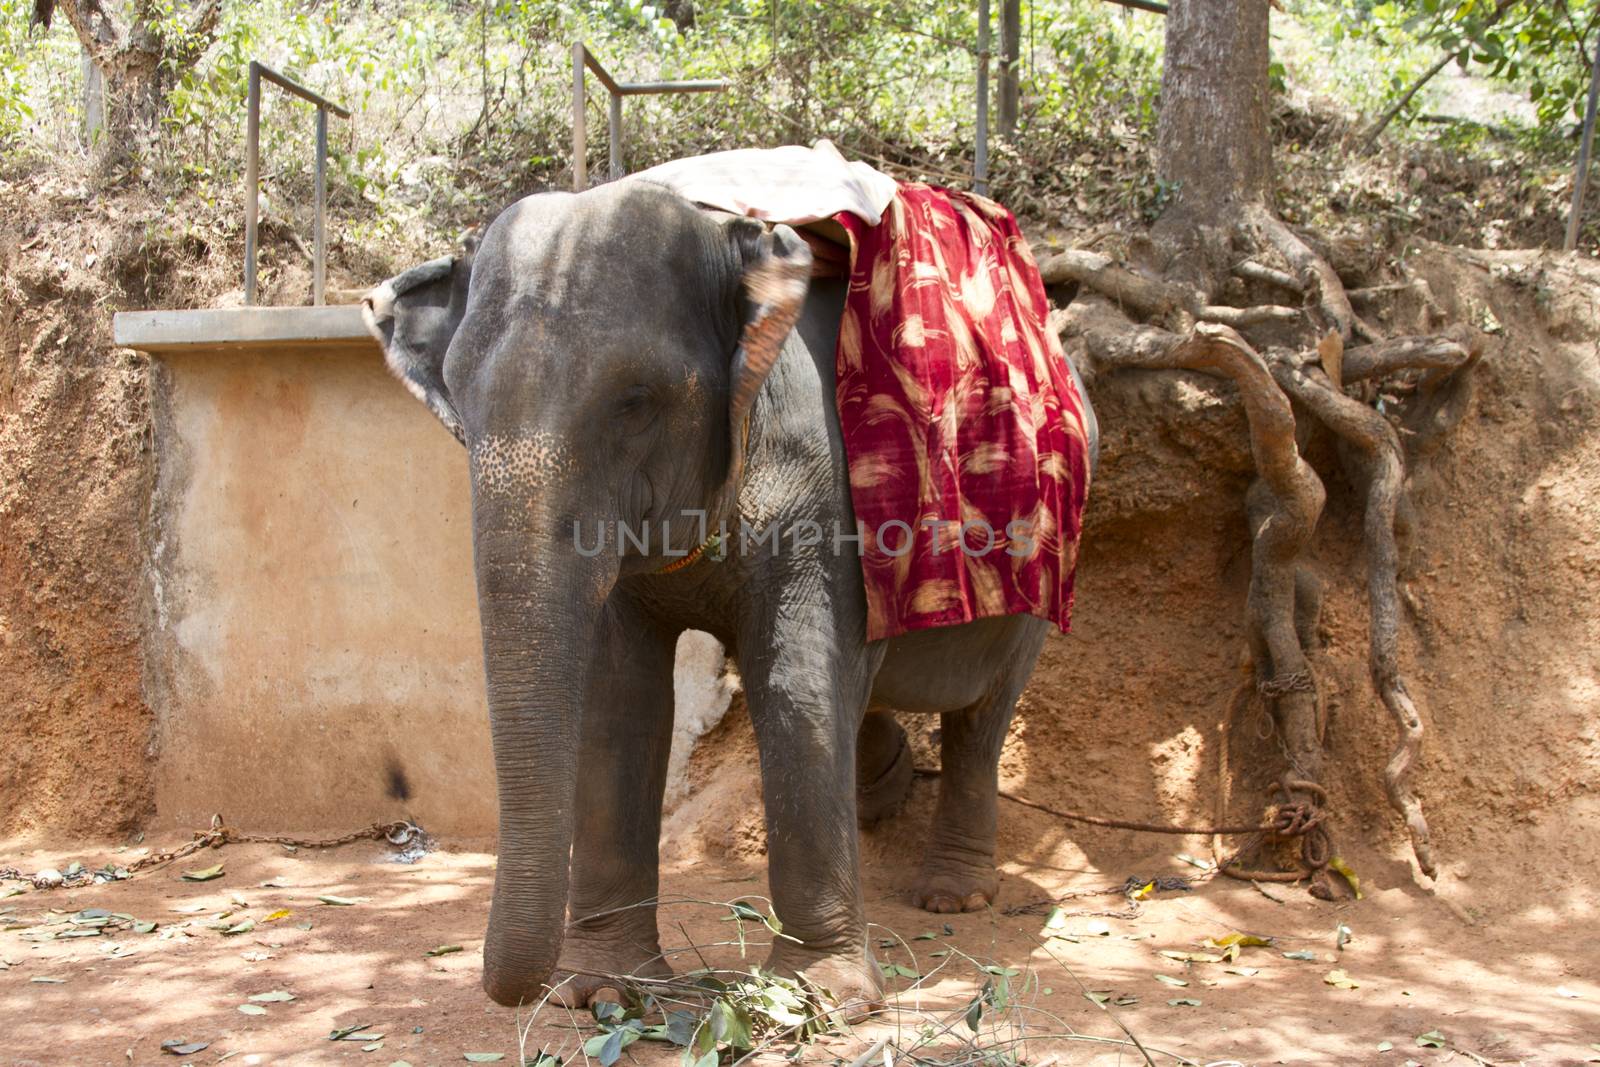 The beautiful Indian elephant with a seat for passengers costs waiting for people.